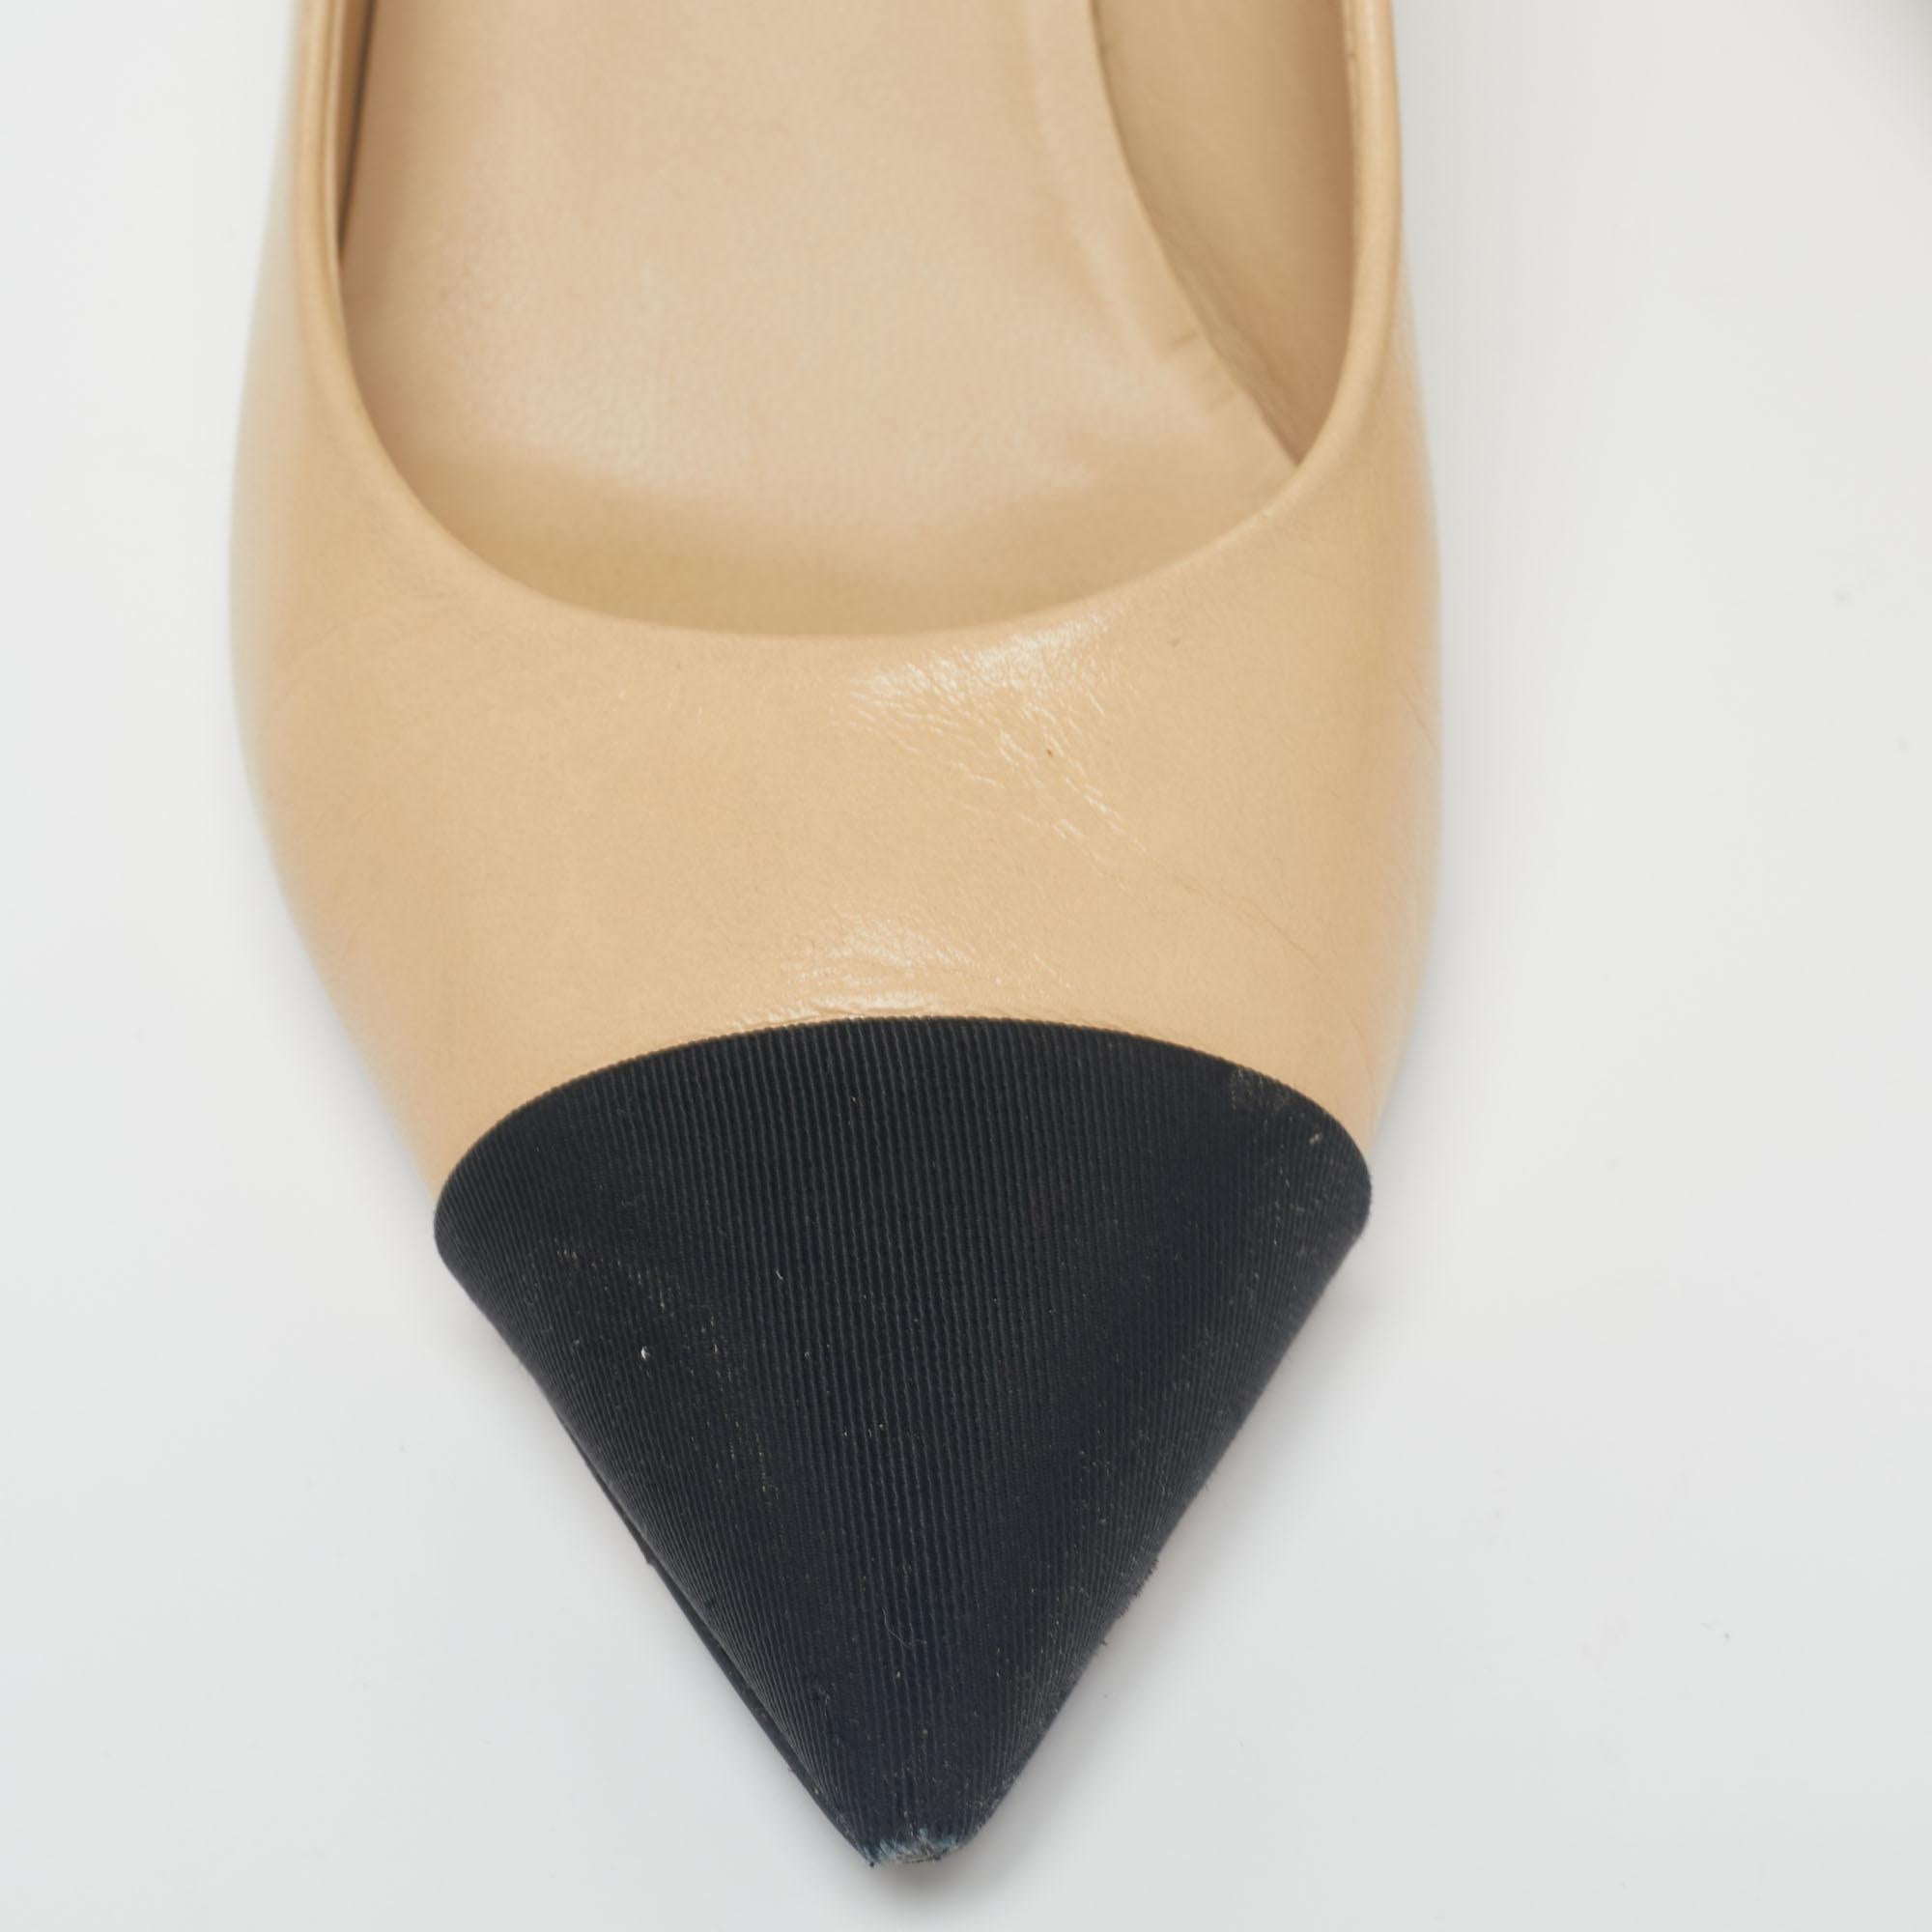 Women's Chanel Black/Beige Leather and Fabric Cap Toe Pointed Toe Pumps Size 36.5